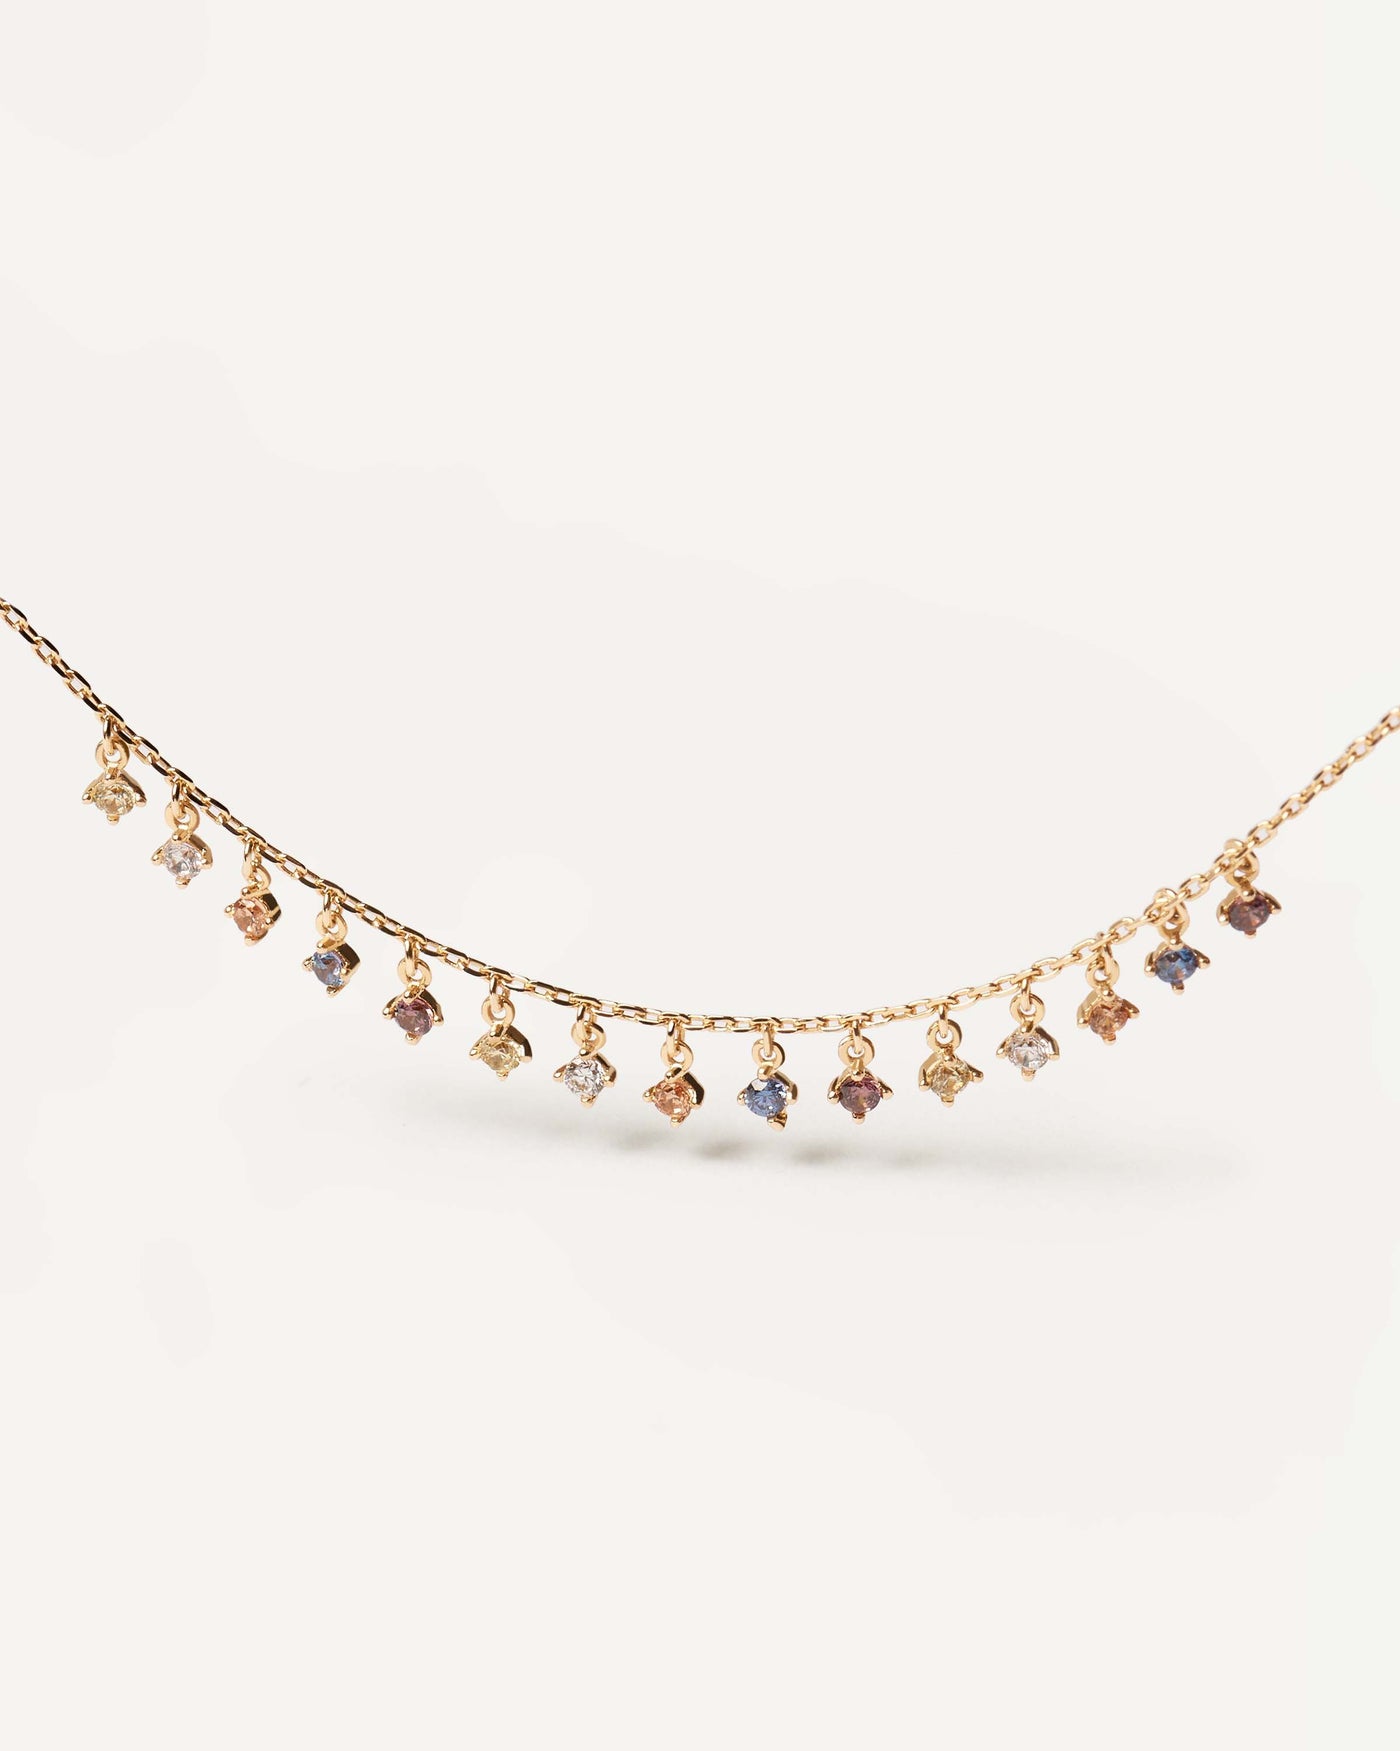 Willow Gold Necklace - 925 sterling silver / 18K gold plating